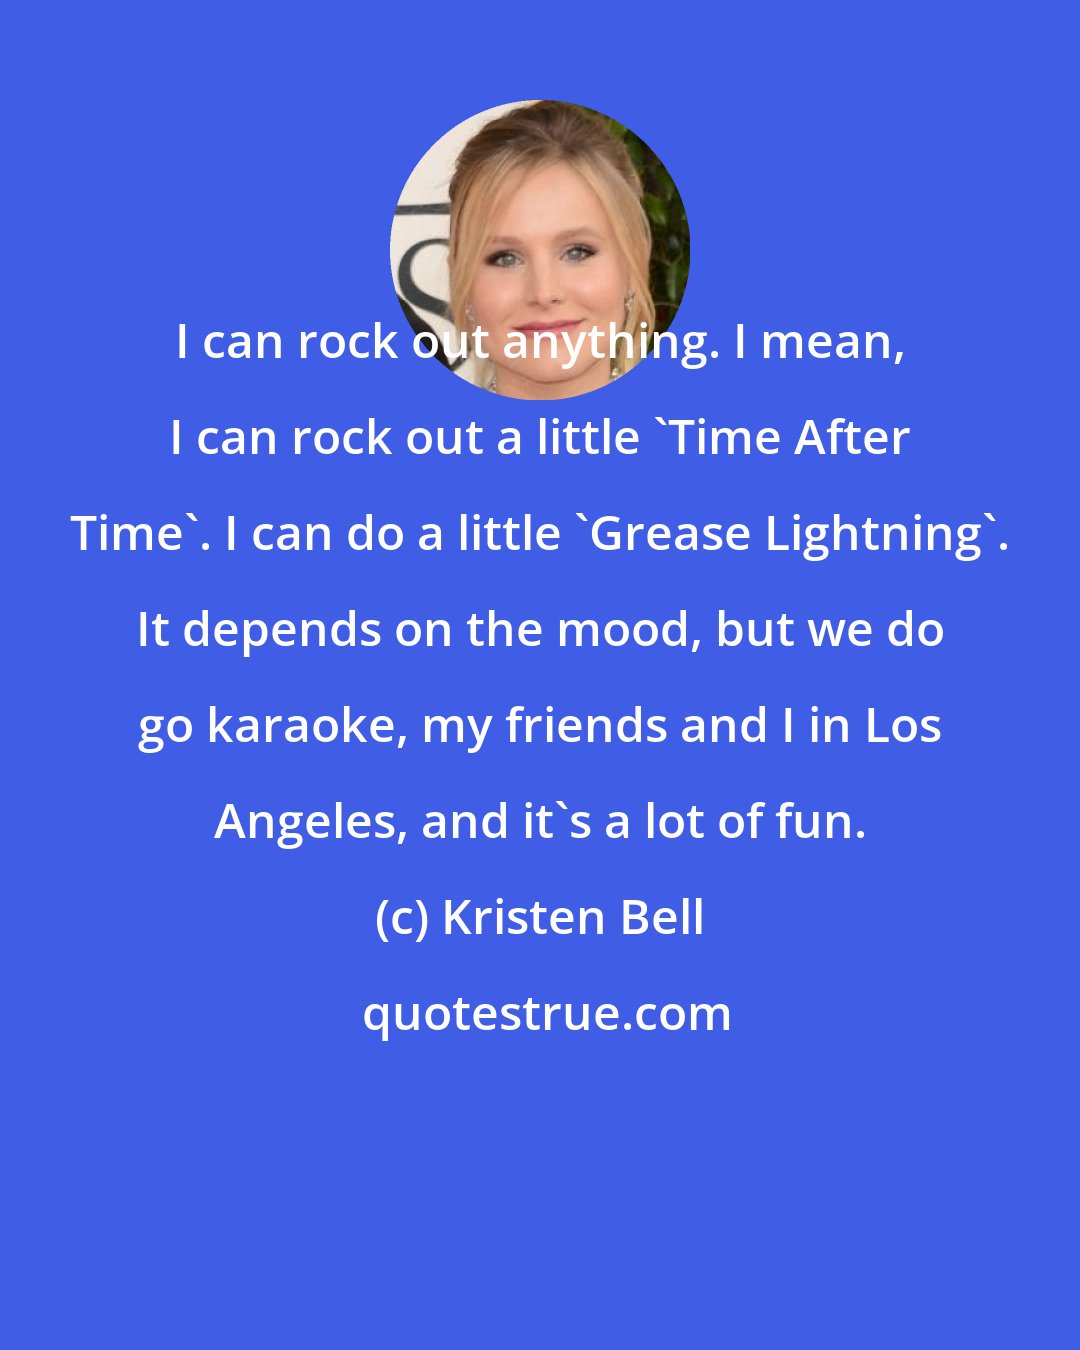 Kristen Bell: I can rock out anything. I mean, I can rock out a little 'Time After Time'. I can do a little 'Grease Lightning'. It depends on the mood, but we do go karaoke, my friends and I in Los Angeles, and it's a lot of fun.